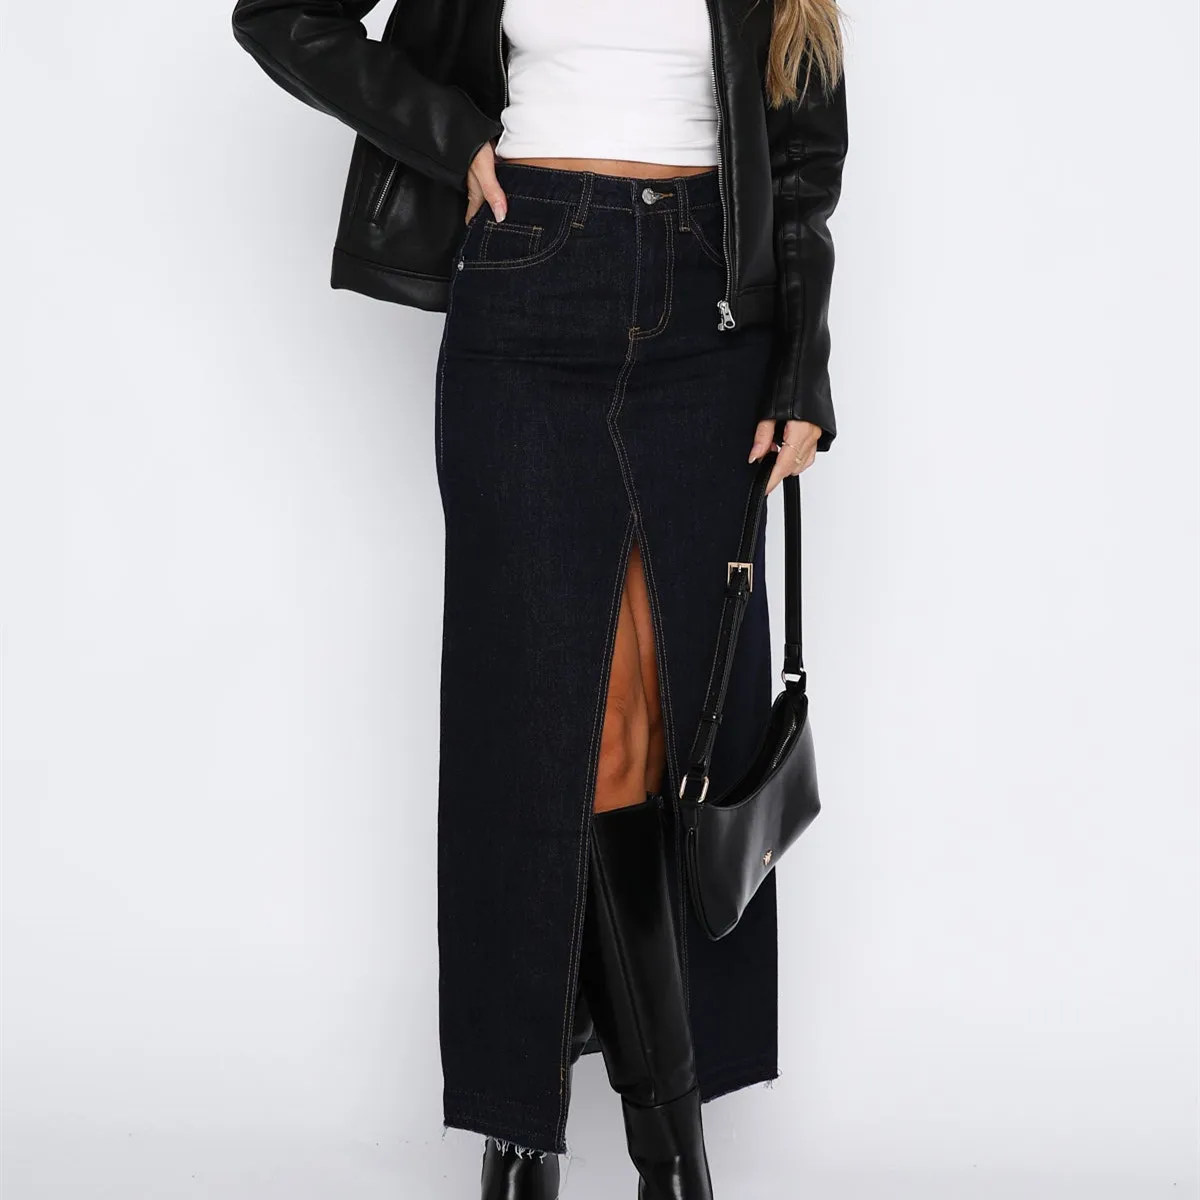 Women Denim Skirt Solid Color Casual Elastic Split Skirt for Beaches Club Streetwear Aesthetic Clothes